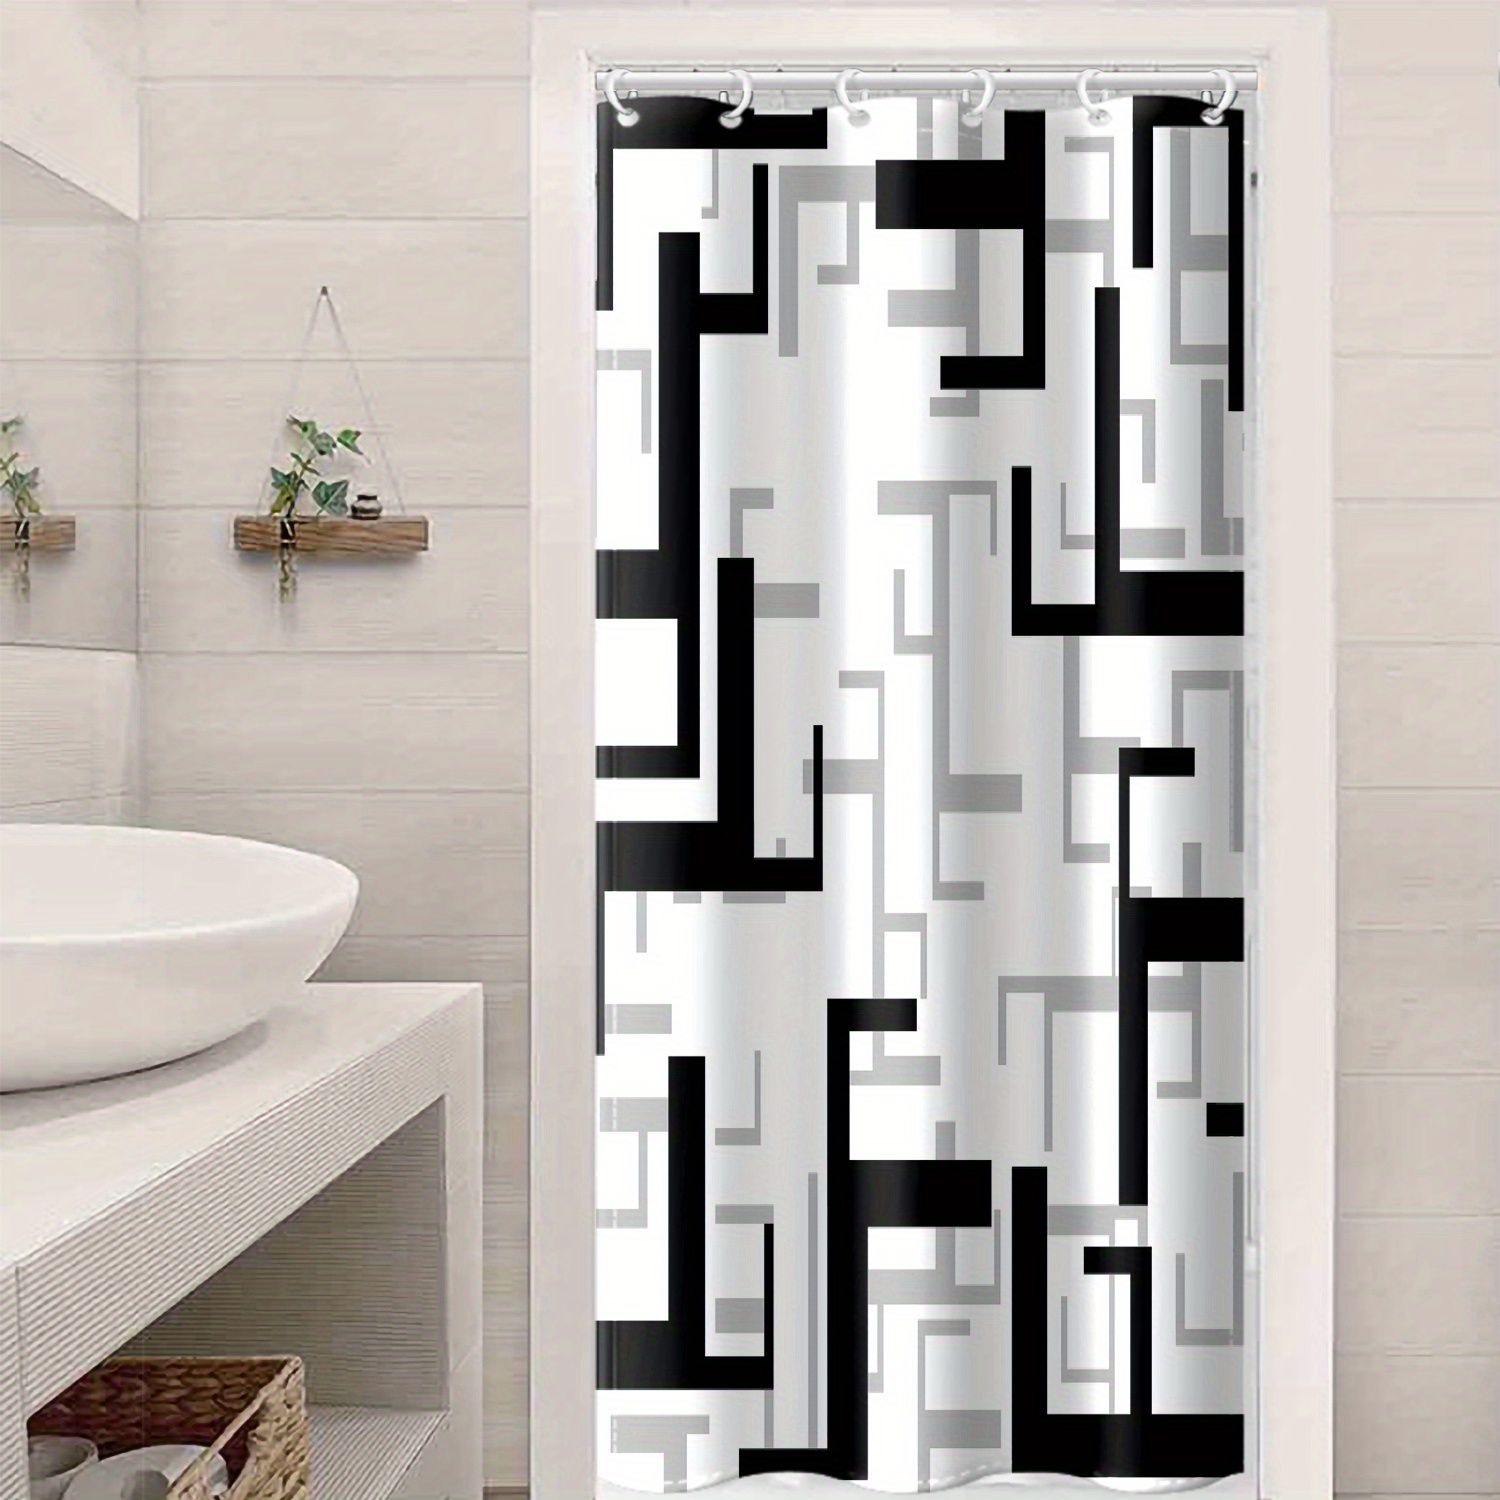 Hooked Shower Curtains